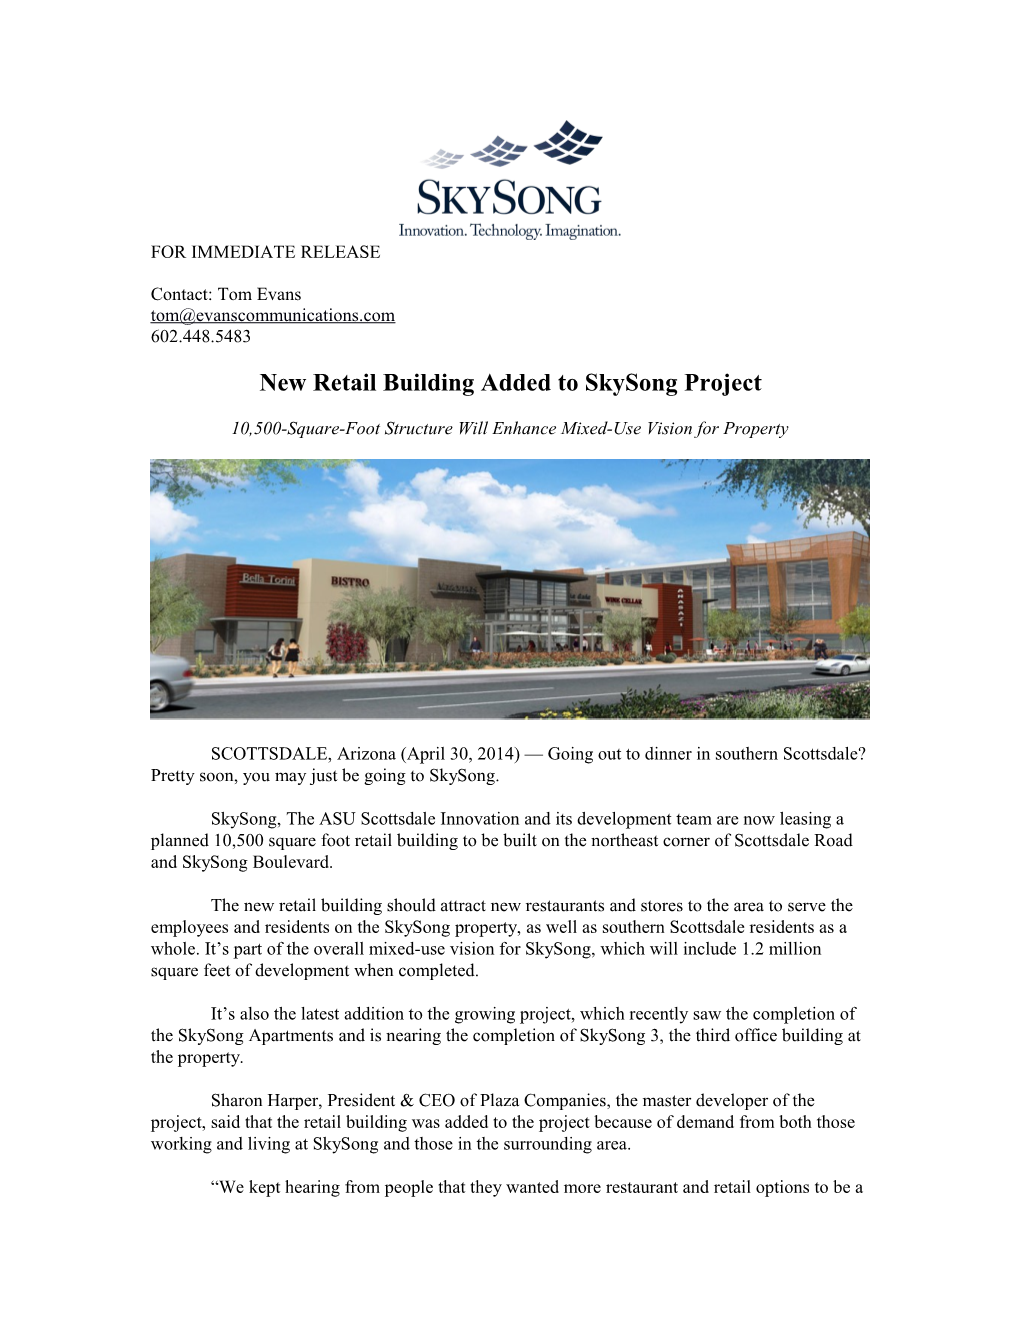 New Retail Building Added to Skysong Project